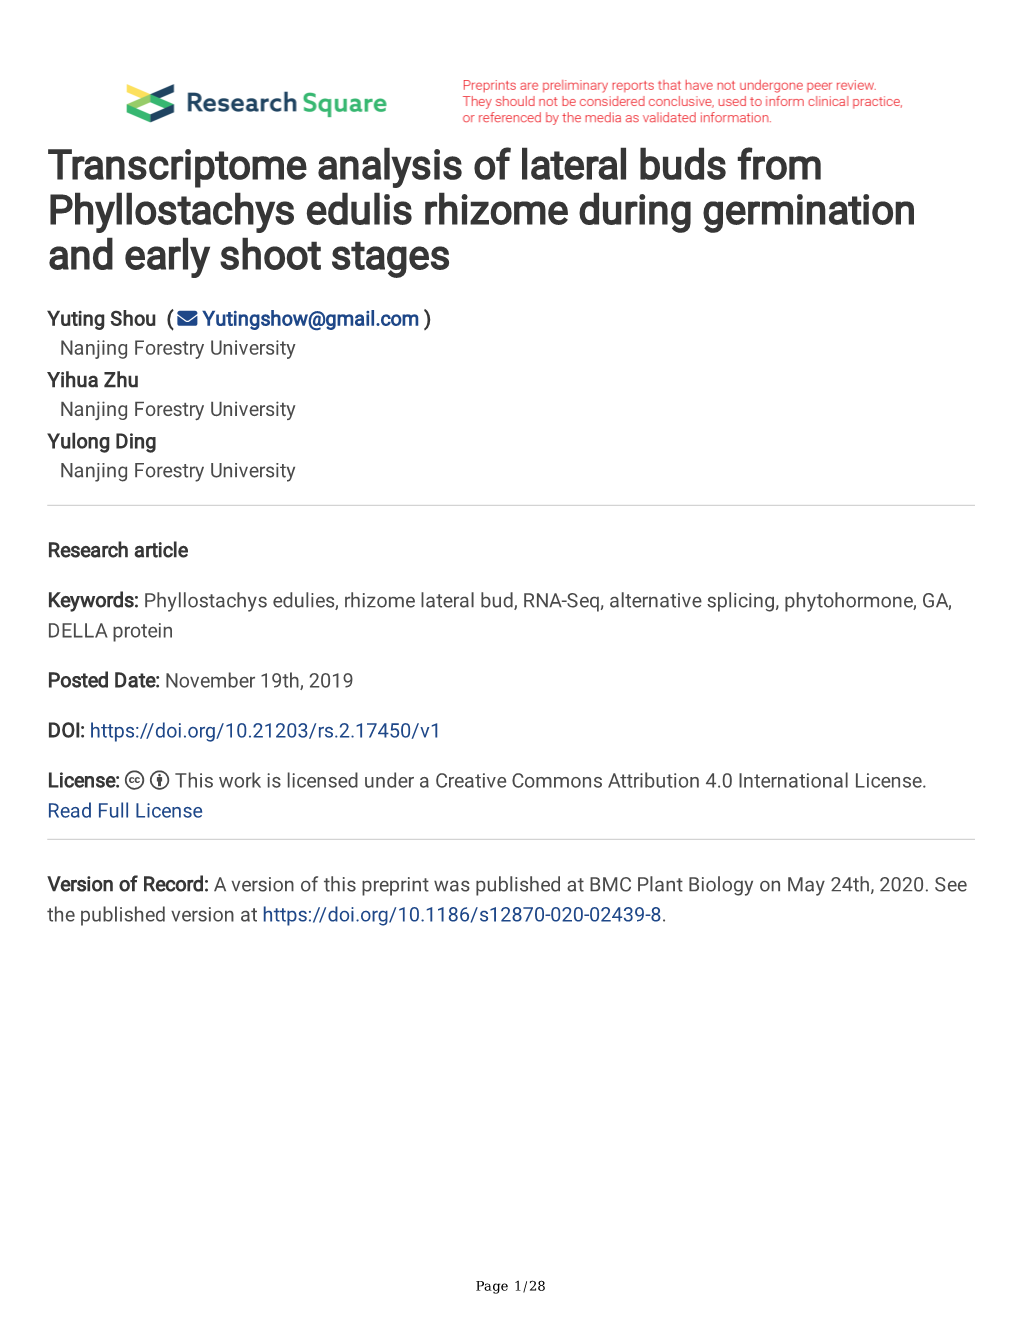 Transcriptome Analysis of Lateral Buds from Phyllostachys Edulis Rhizome During Germination and Early Shoot Stages